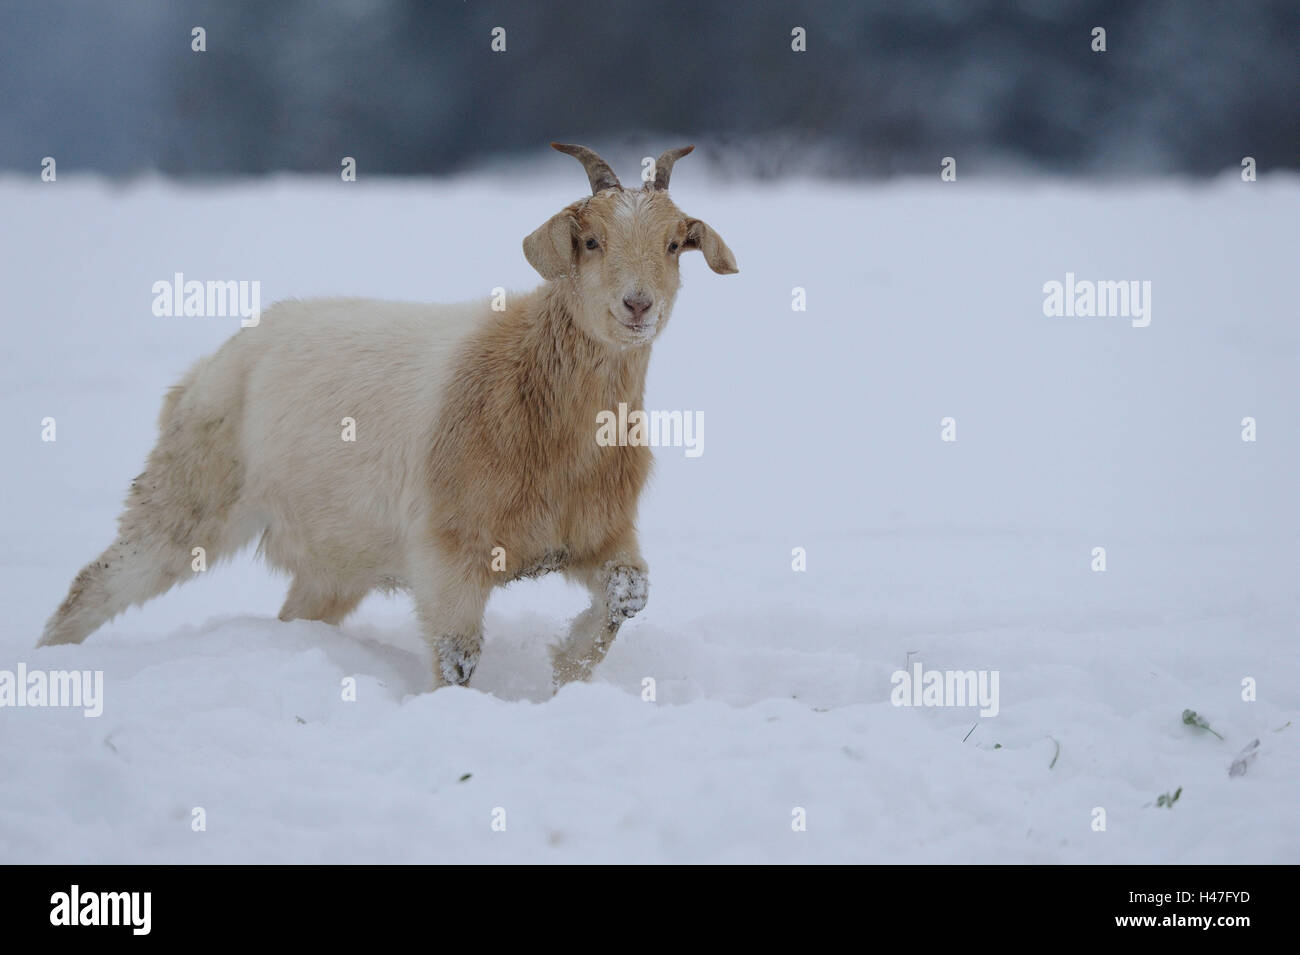 Boer goat, side view, walking, Looking at camera, snow, winter, Stock Photo